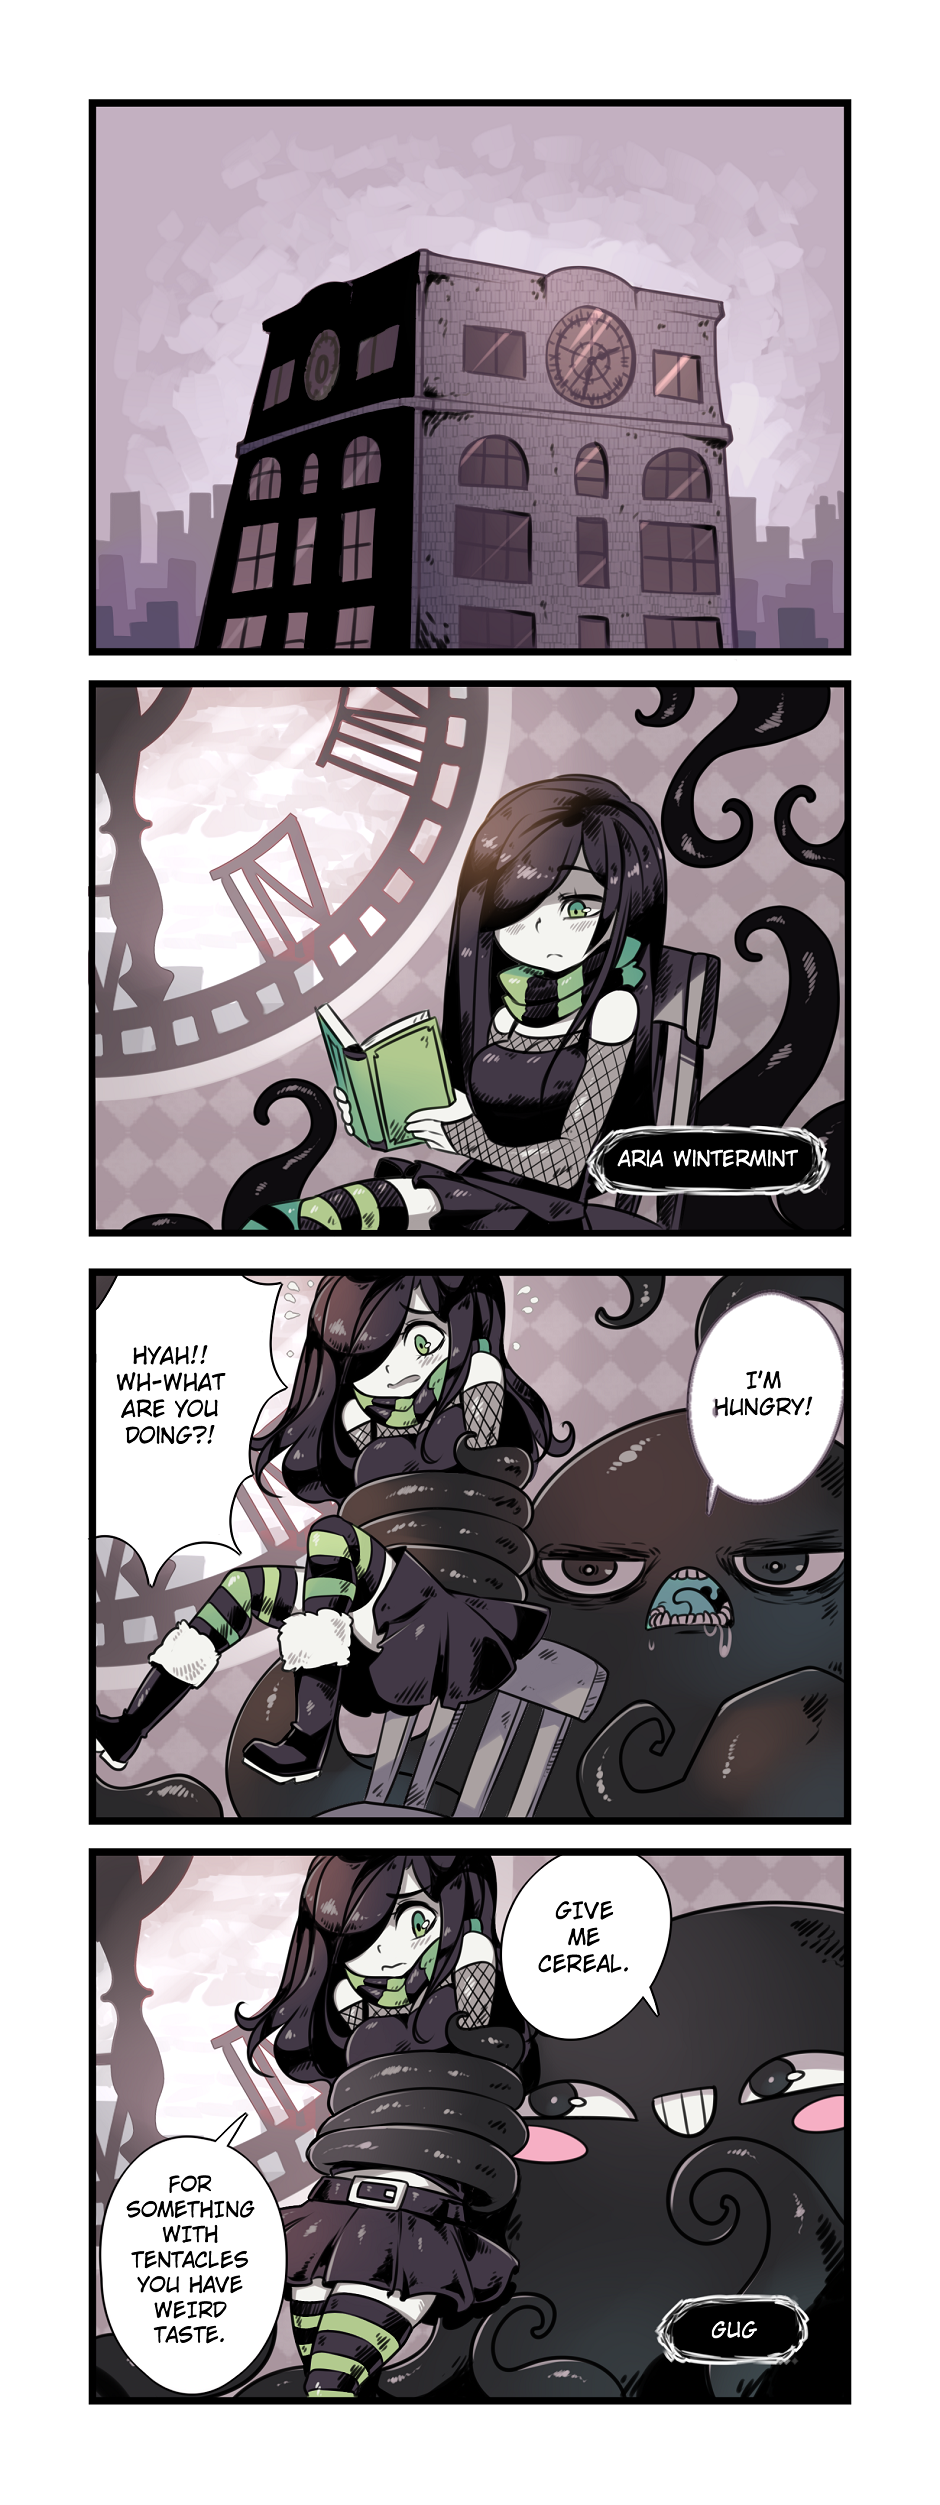 The crawling city